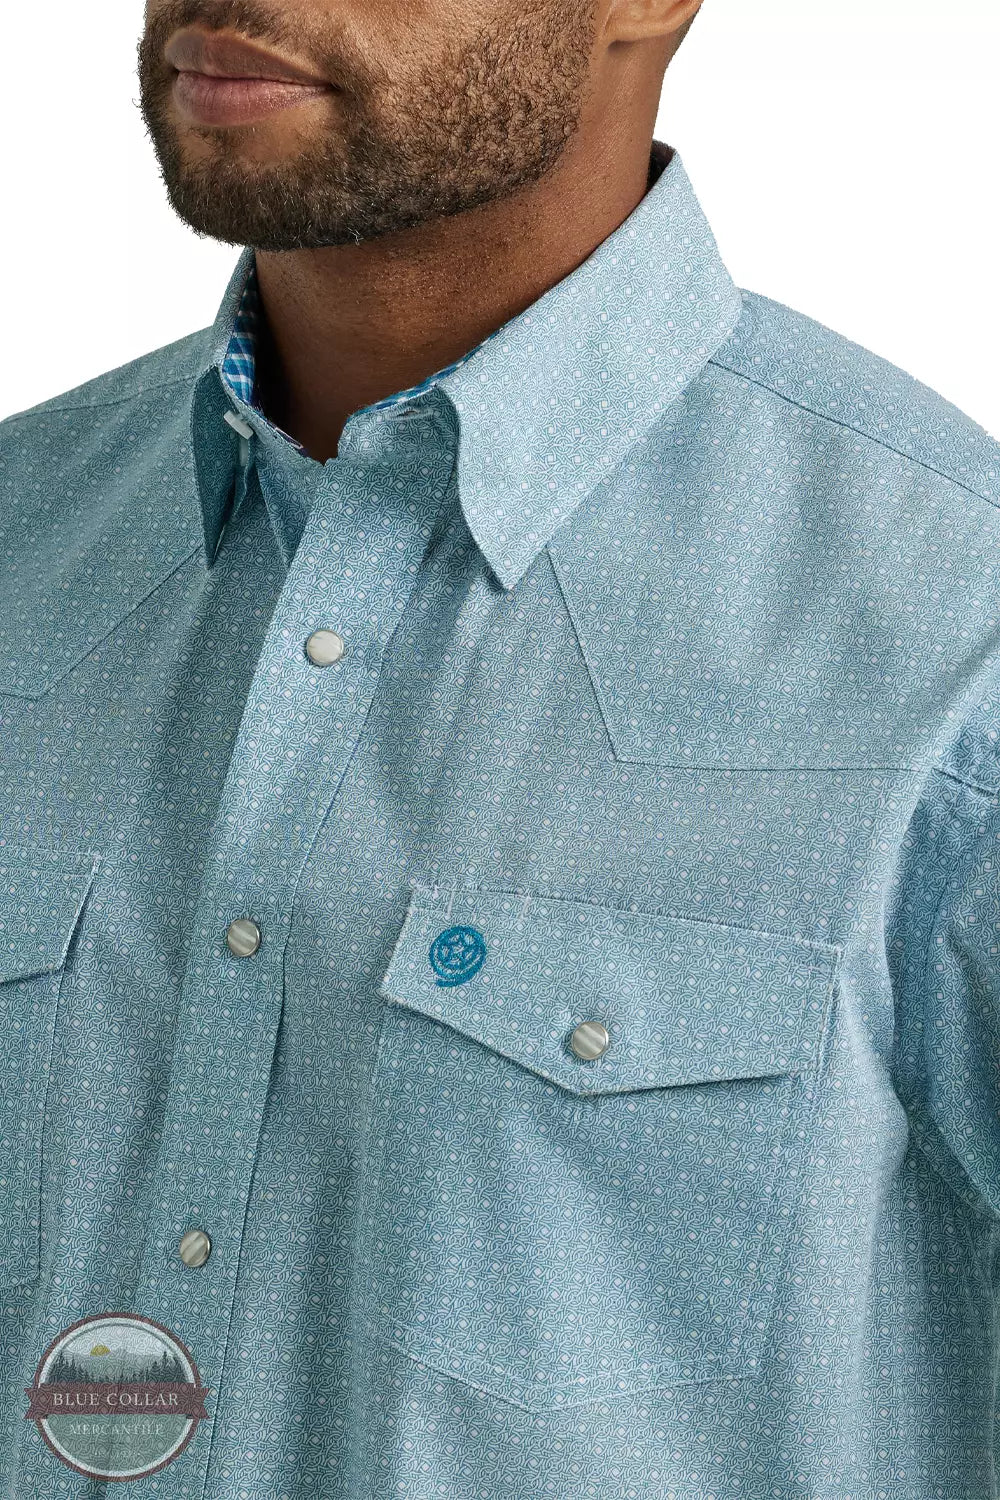 Wrangler 112331827 George Strait Troubadour Long Sleeve Western Snap Shirt in a Turquoise Chain Detail